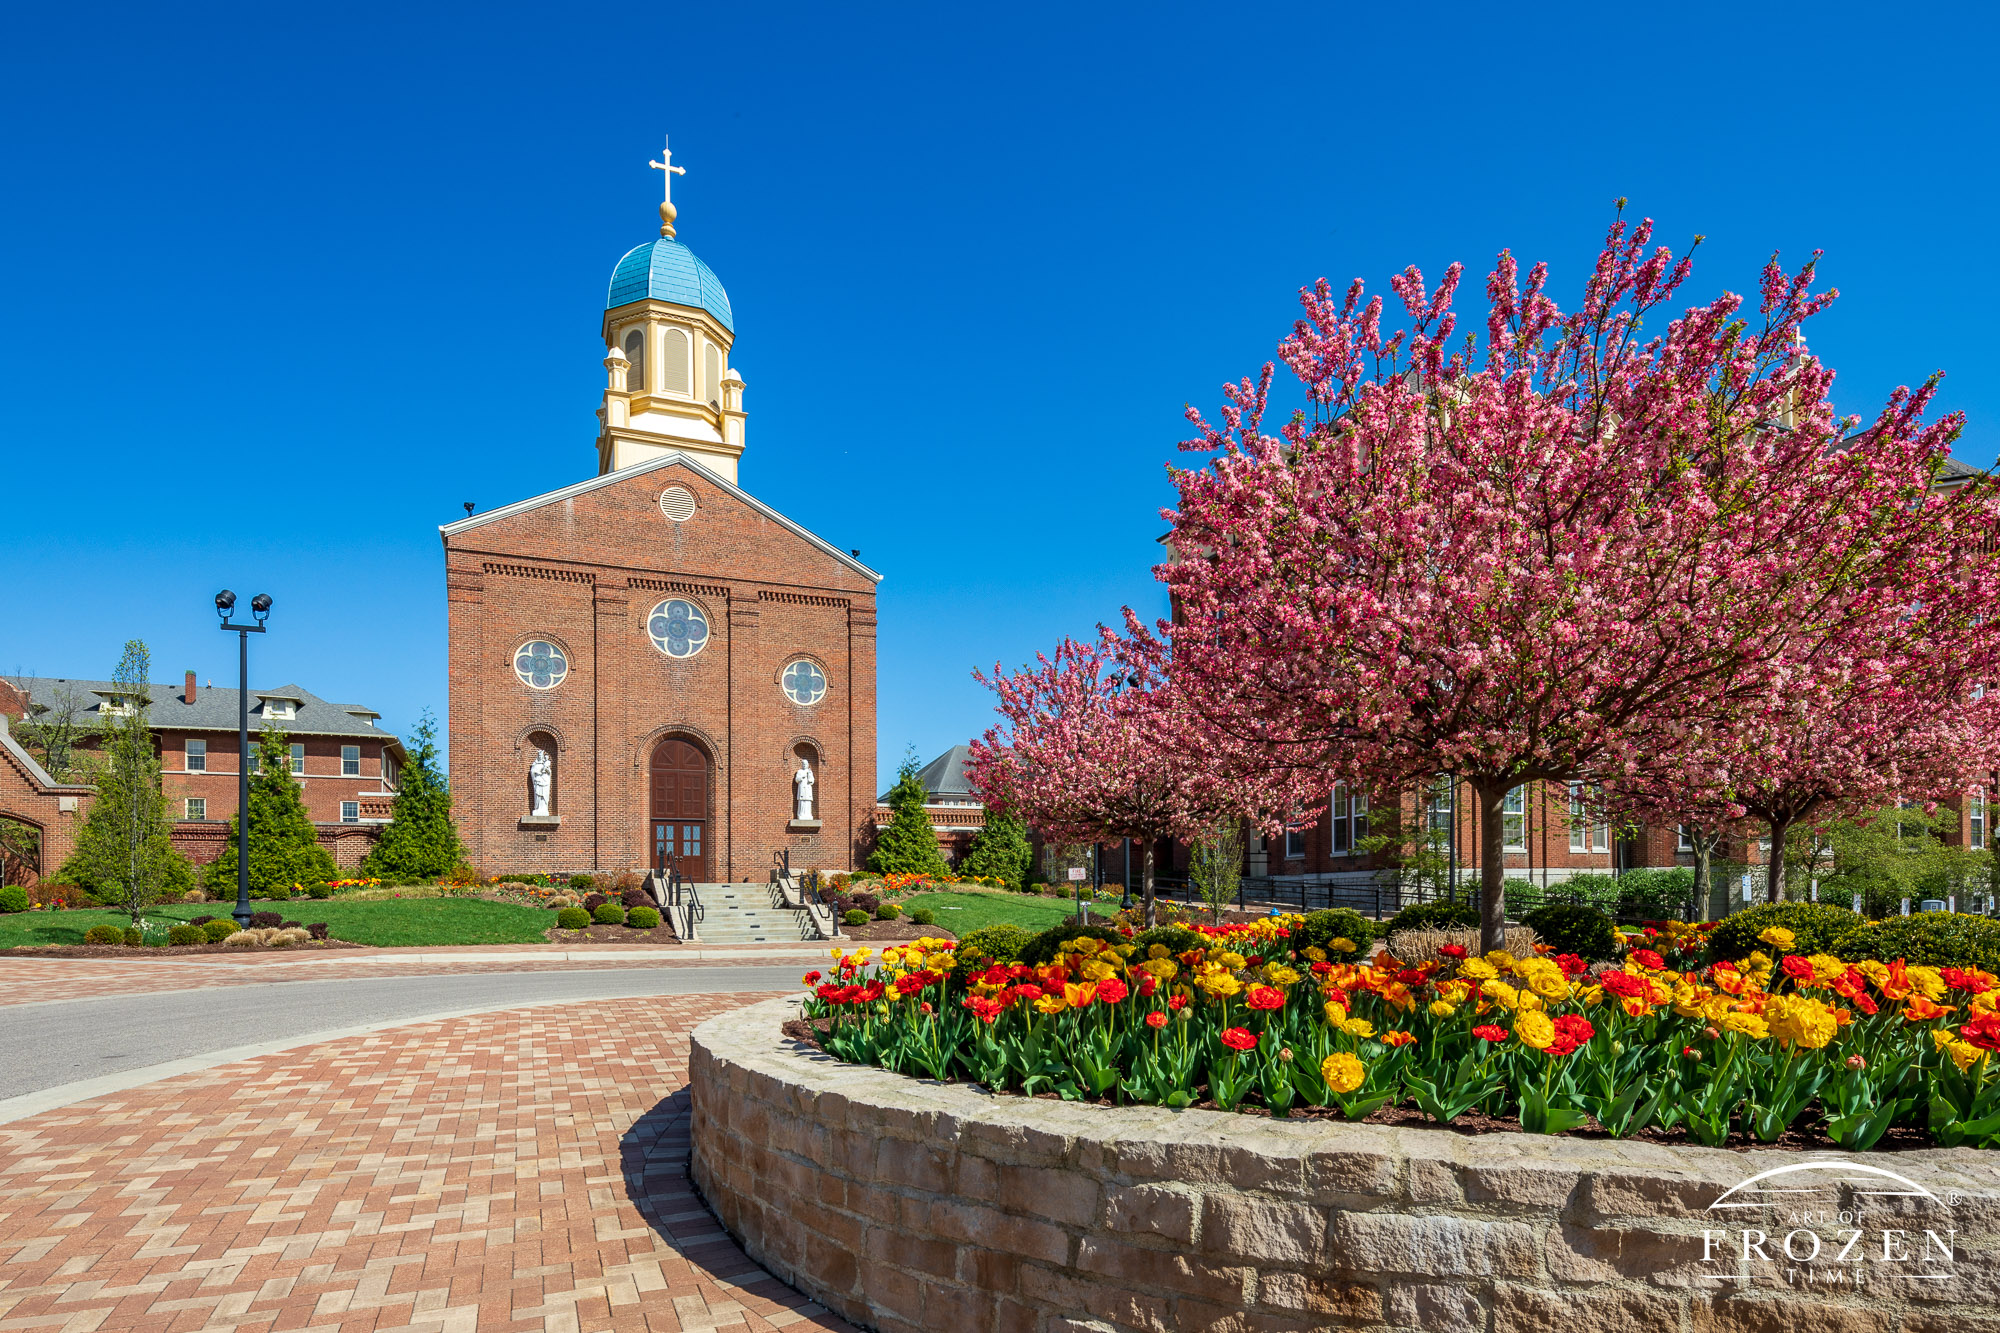 University of Dayton’s Immaculate Conception Chapel under blue skies.with red and yellow tulips standing under pink flowering trees